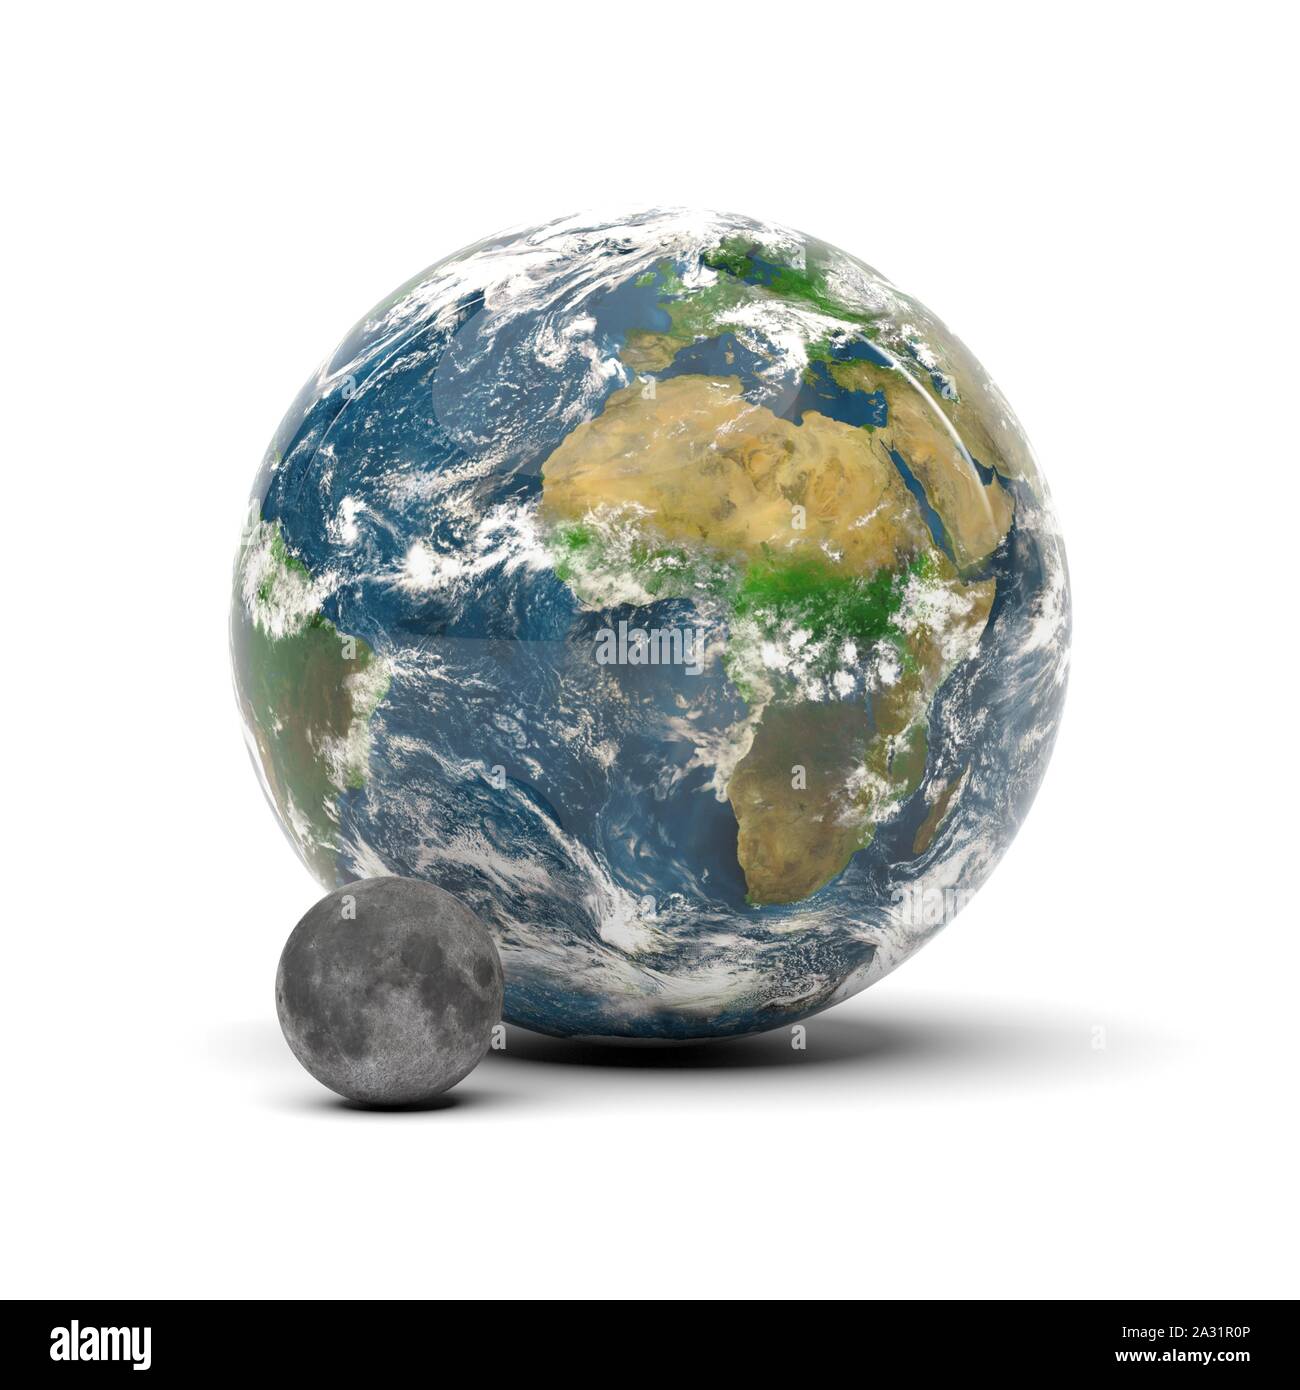 moon and earth size comparison Stock Photo